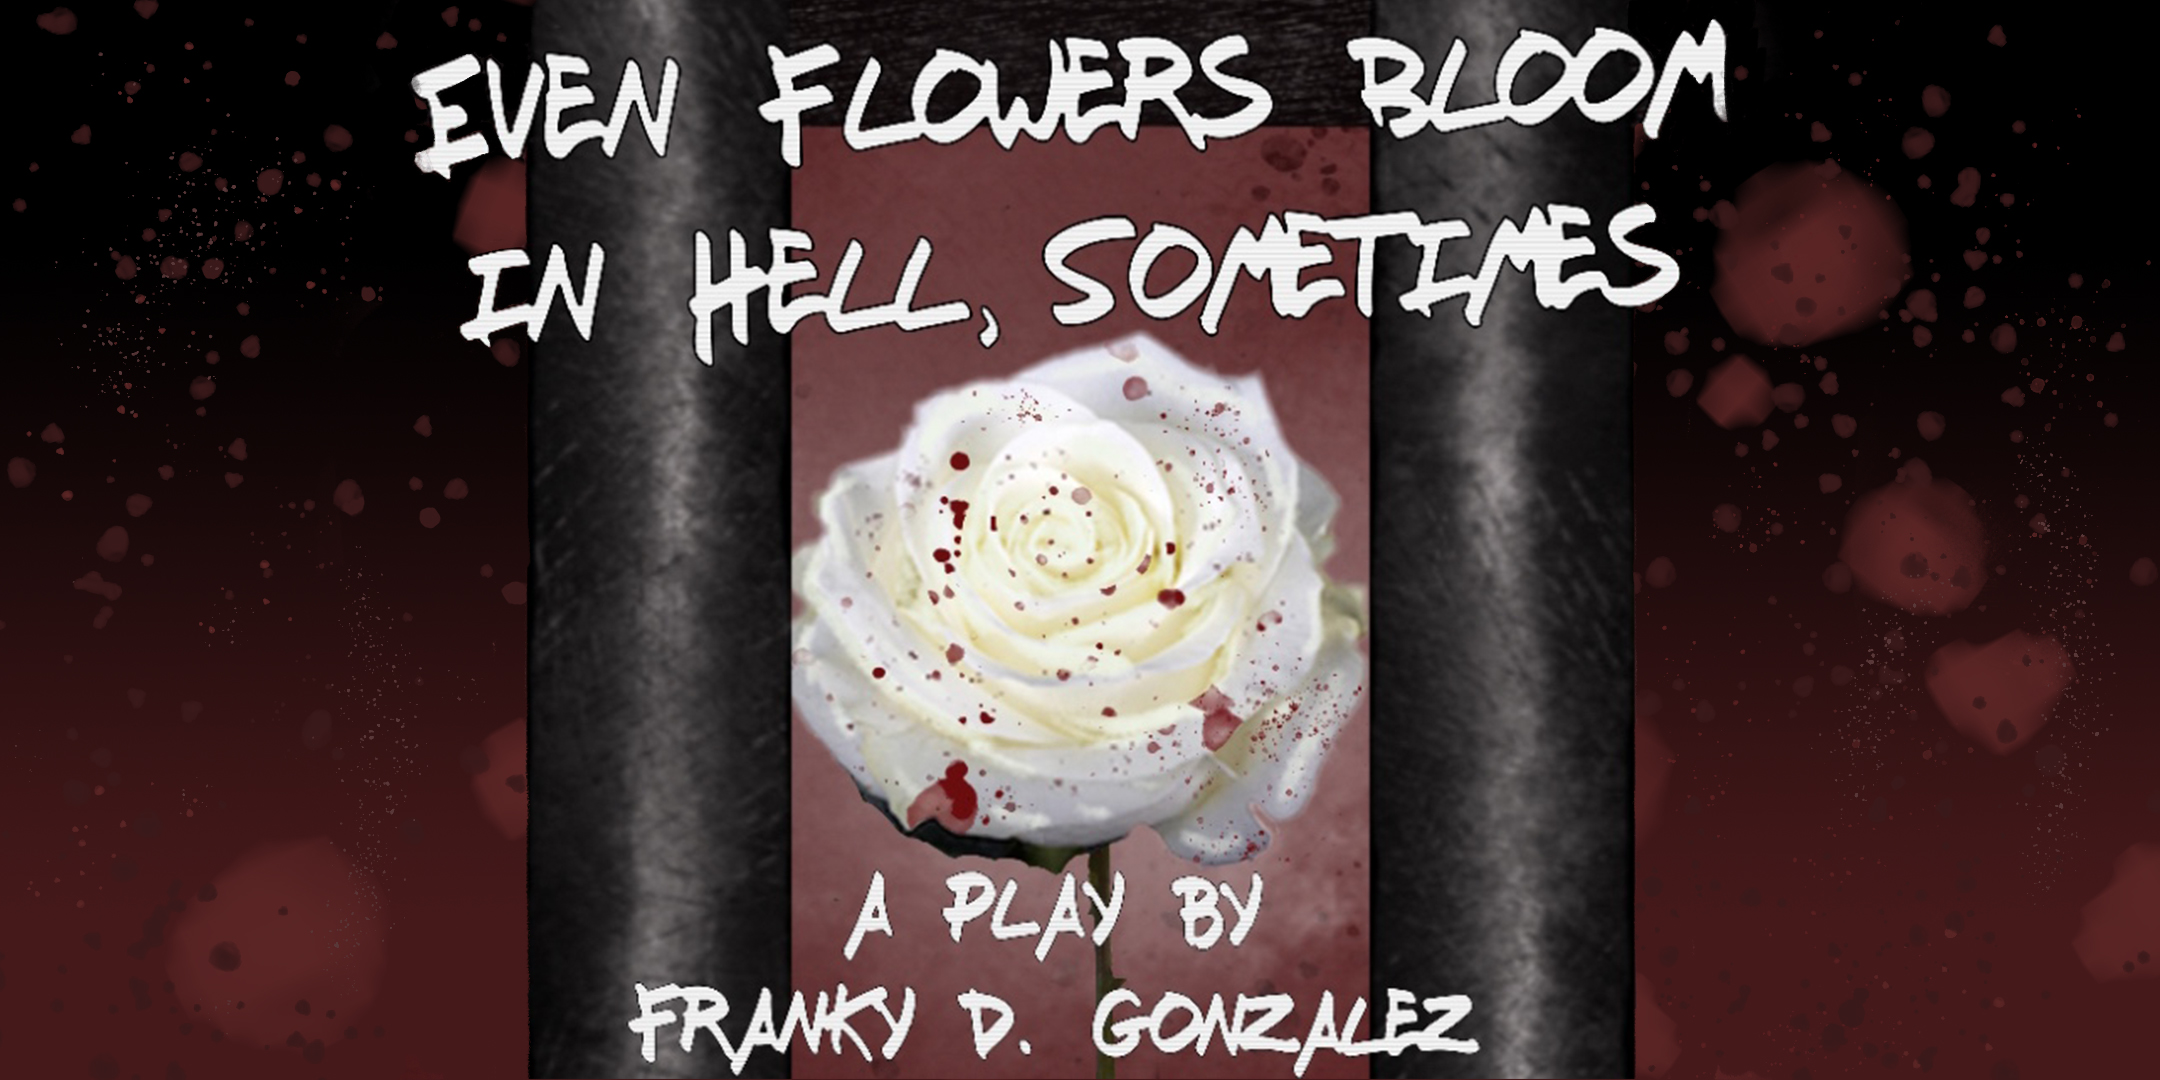 Even Flowers Bloom in Hell, sometimes. A play by Franky D. Gonzalez poster. A white rose with drops of red blood behind jail bars.